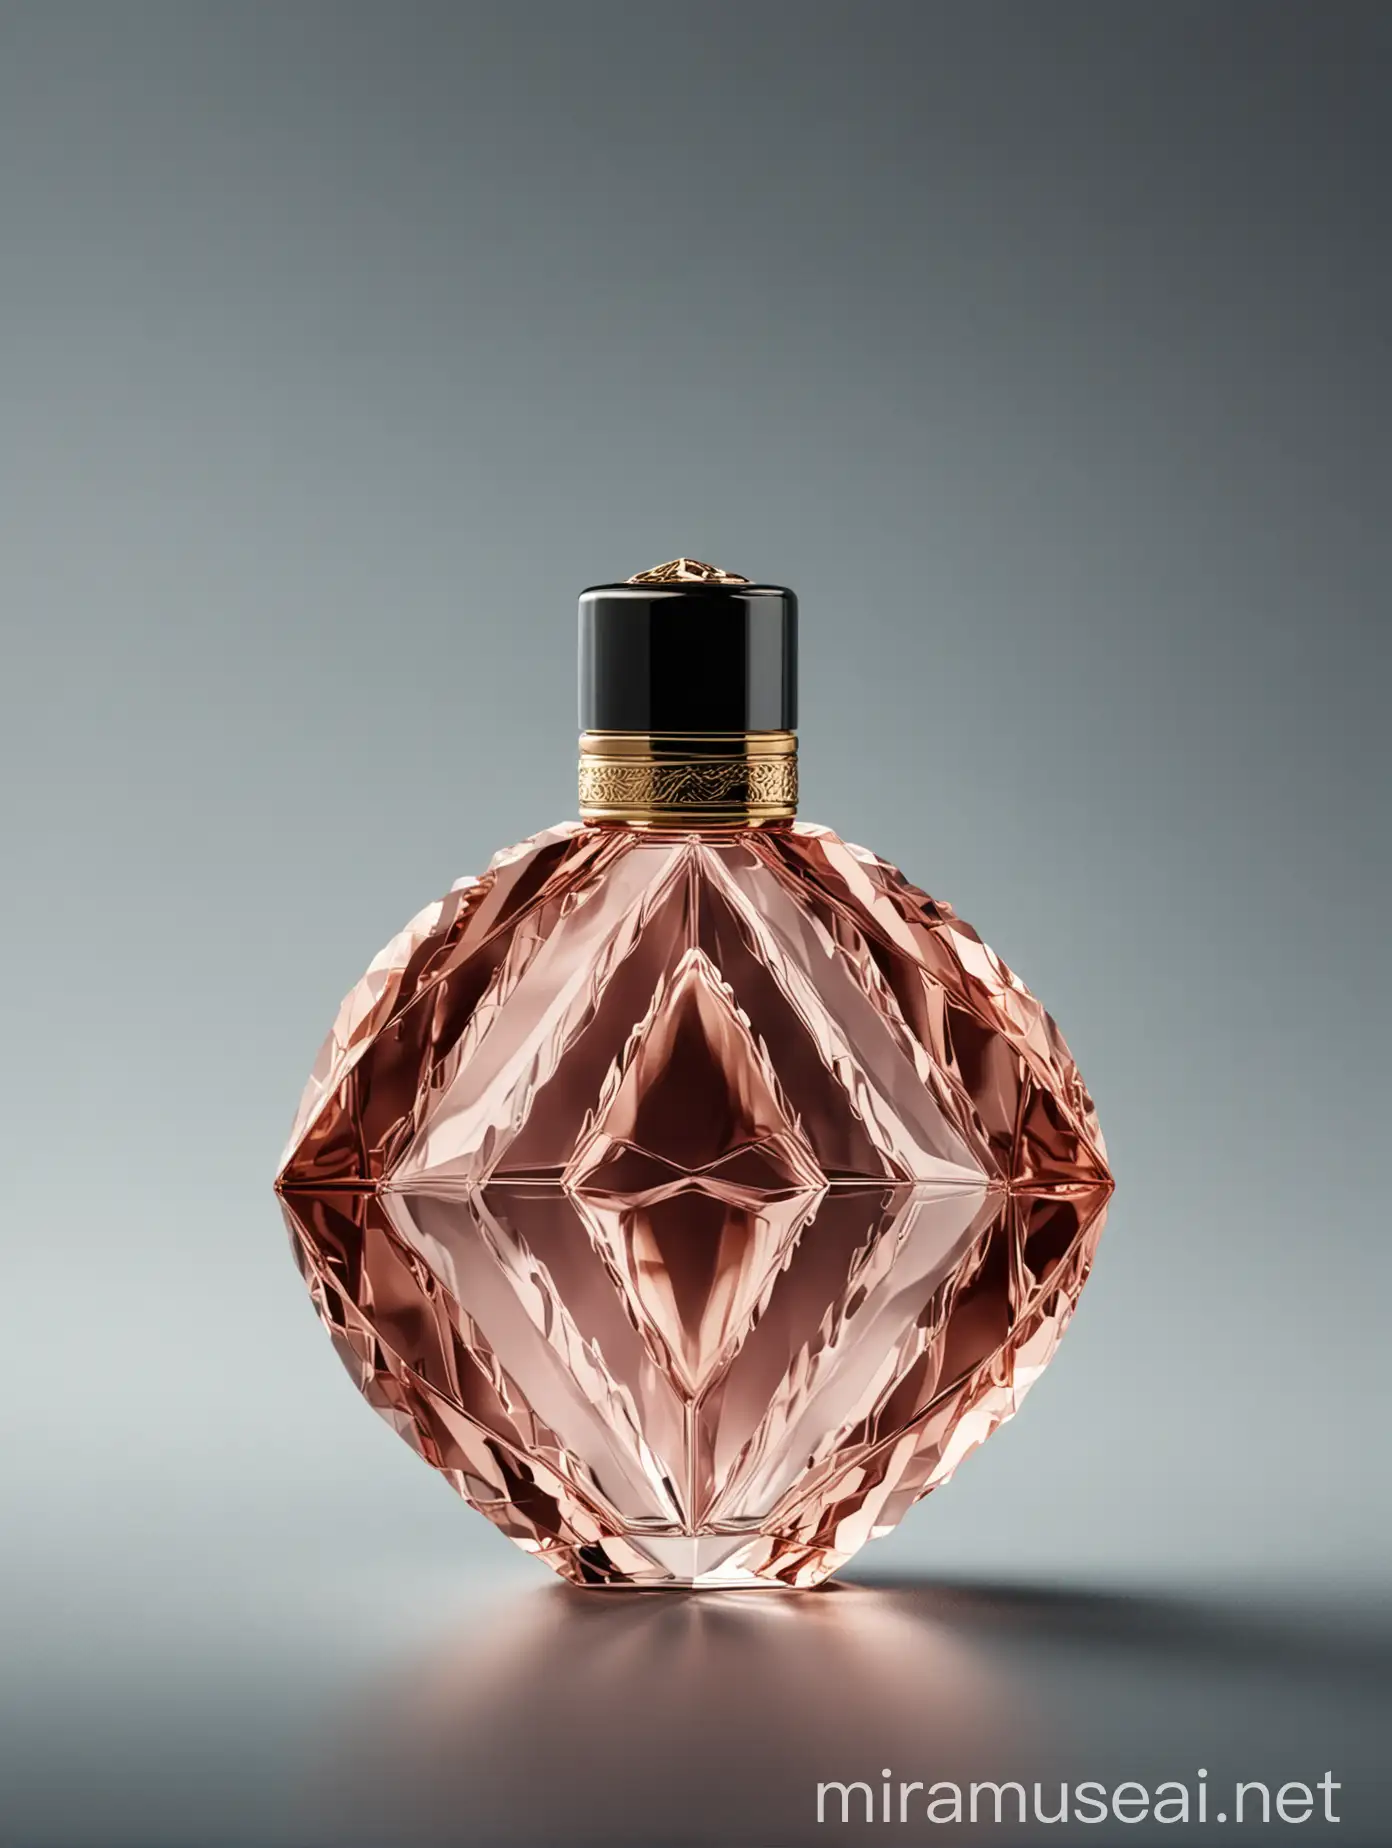 The Image Shows side view of one Perfume bottle. The Perfume bottle is set against an isolated background. It is the perfect Perfume bottle with a symmetrical, geometric and beautiful shape.